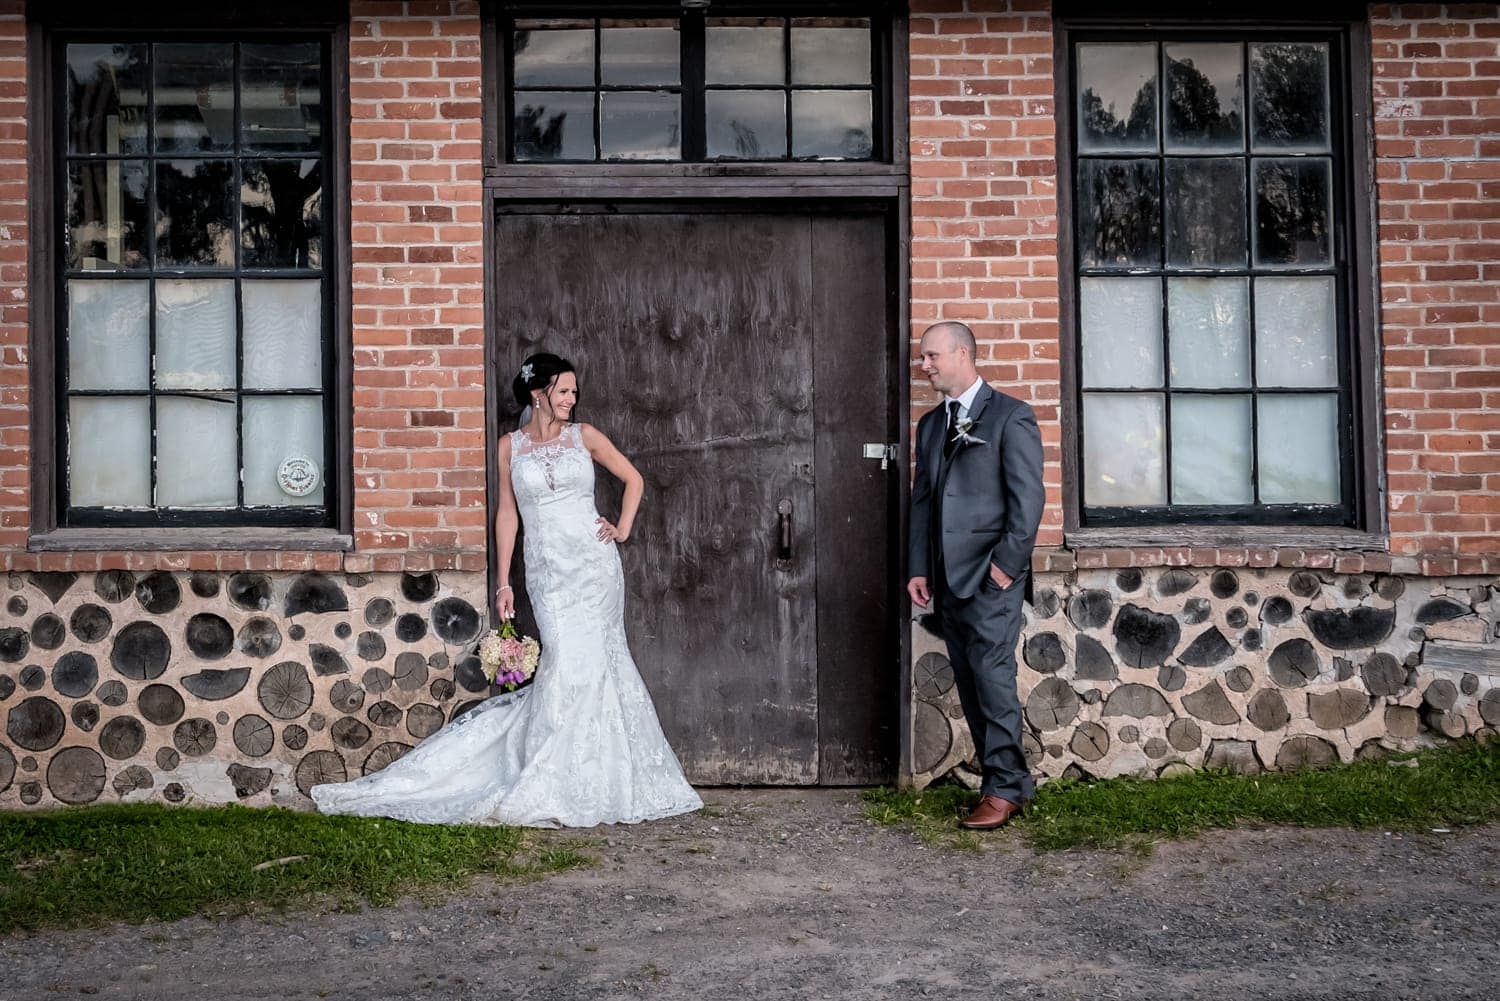 The bride and groom wedding photos, they are standing against the wooden doors of an urban brick style building at the Old Orchard Inn.